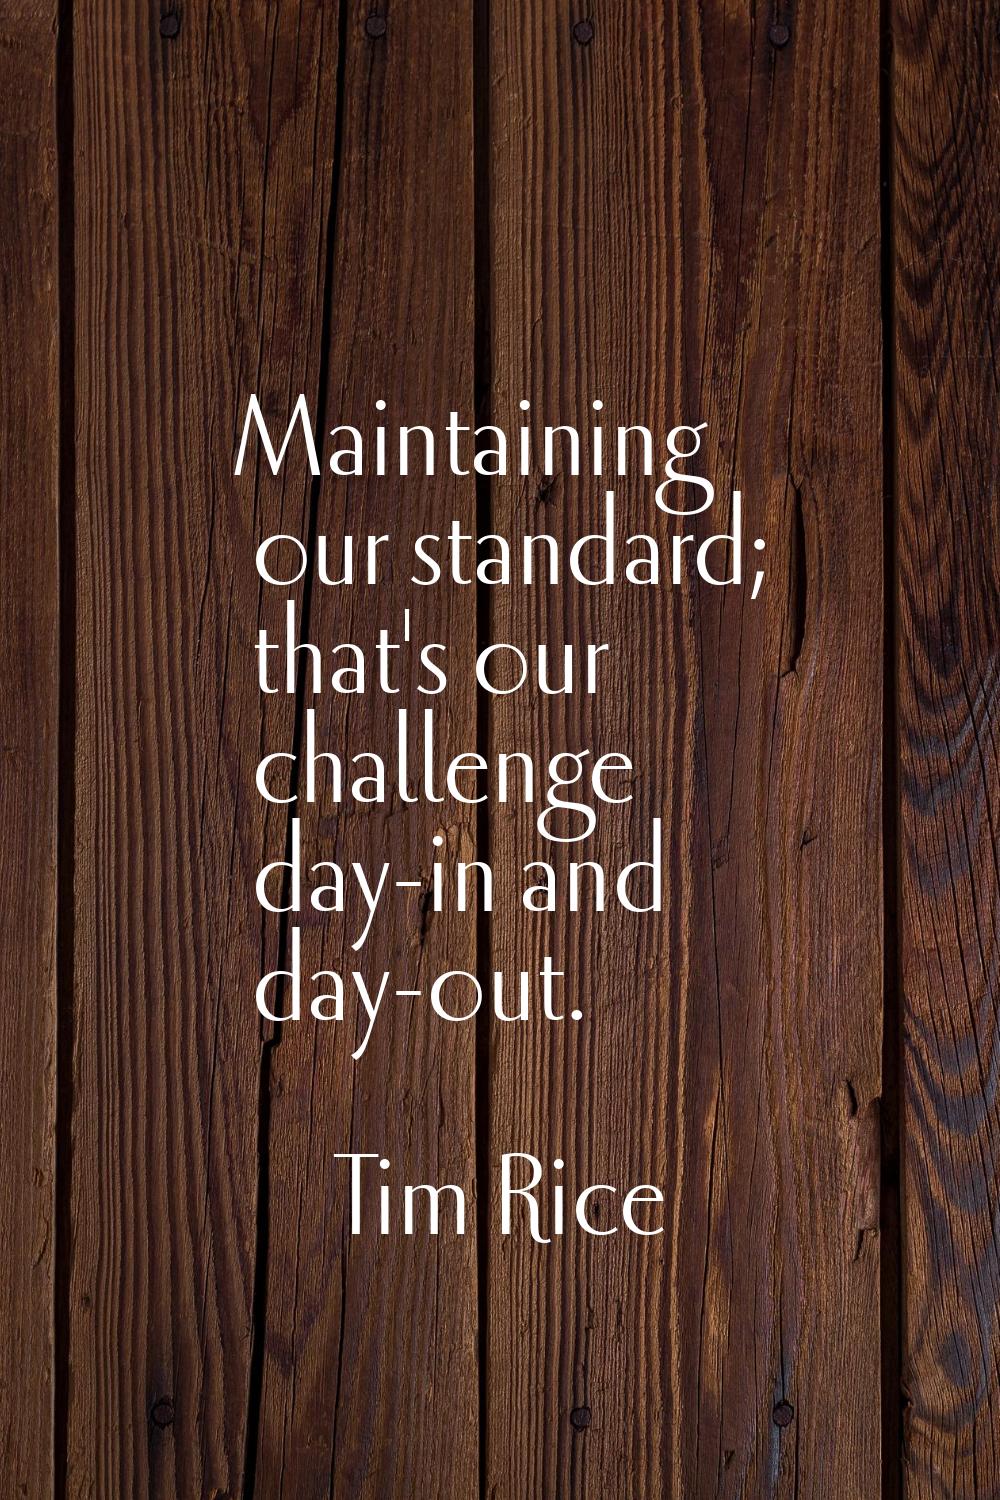 Maintaining our standard; that's our challenge day-in and day-out.